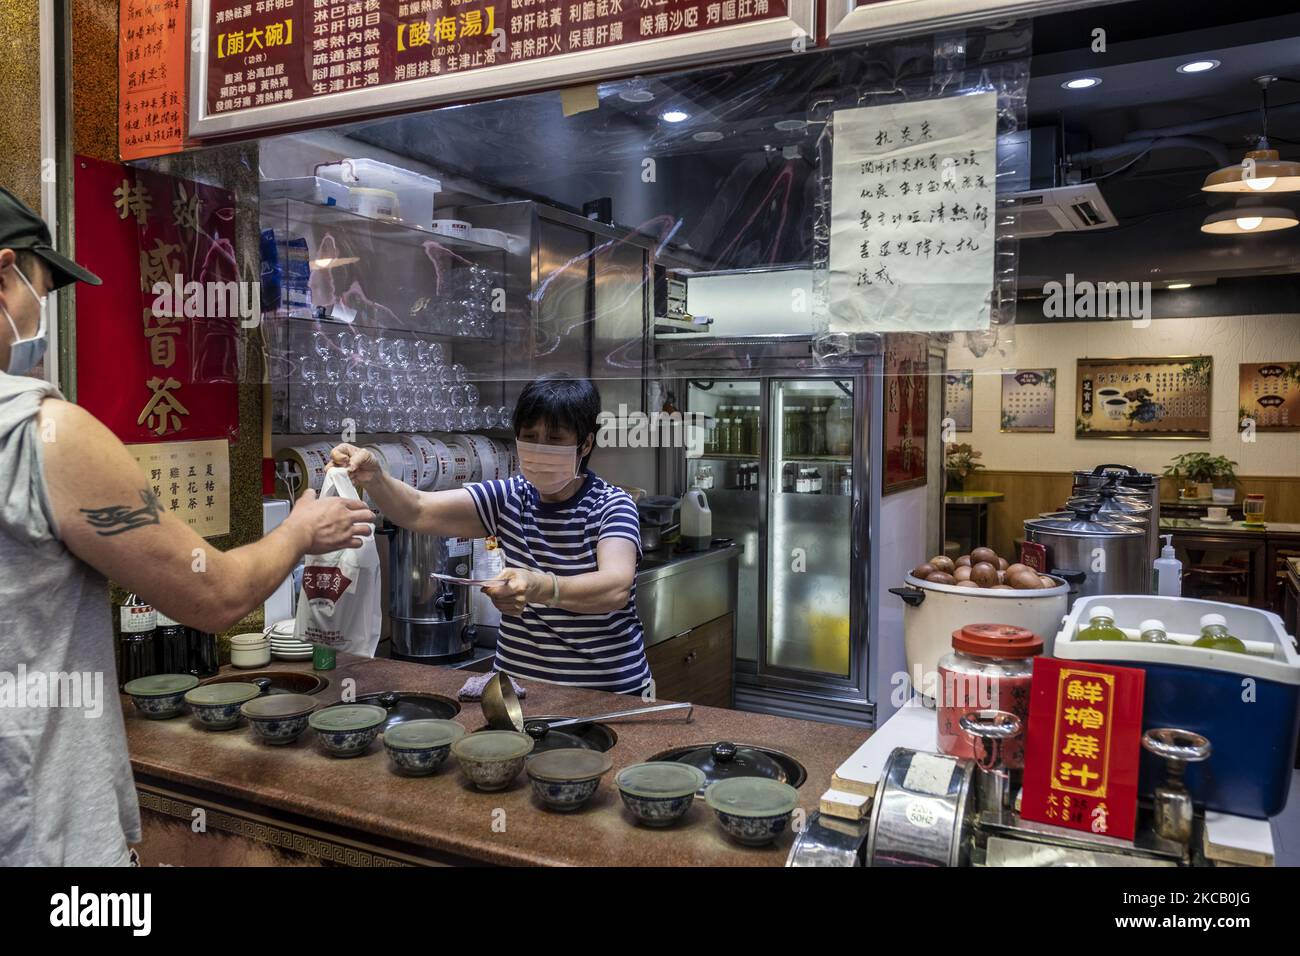 A Man buys tea at a herbal tea store in Hong Kong, Tuesday, March 16, 2021. Hong Kong's unemployment rate has risen to 7.2 Precent its highest level since 2004 amid the coronavirus outbreak, the labour minister warned that the job market still faces challenges with the pandemic not yet fully contained here, More than 261,000 people were left without a job in the period under review. That's 8,300 more than before, The city's jobless rate hit an all-time high of 8.5 percent during the Sars outbreak in 2003. (Photo by Vernon Yuen/NurPhoto) Stock Photo